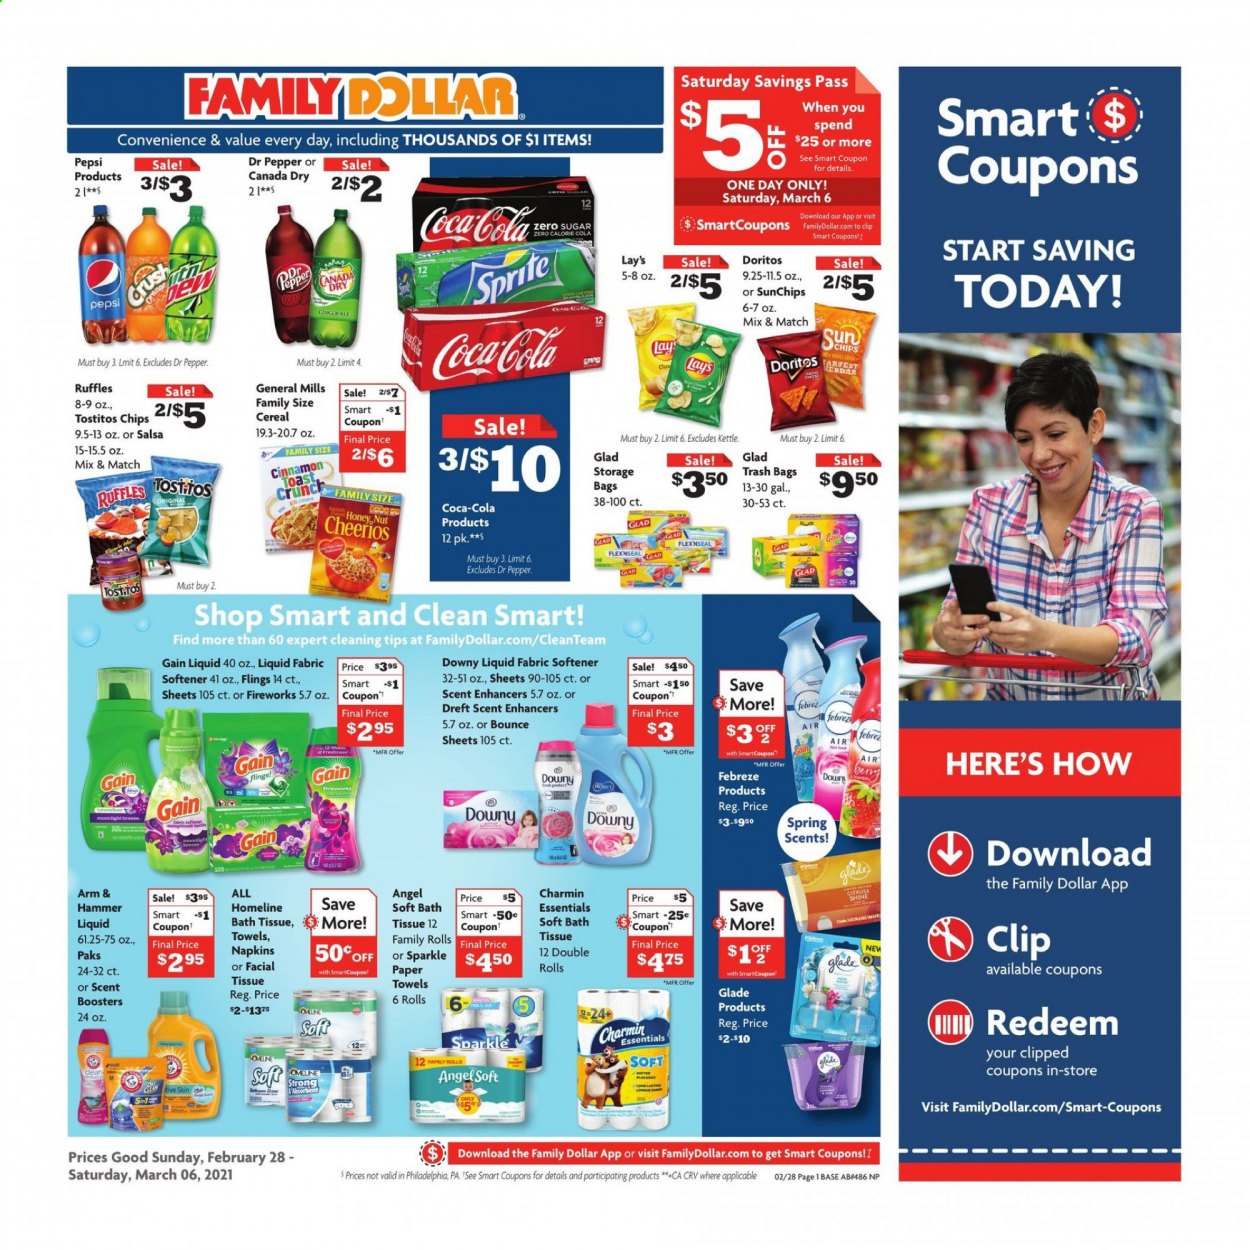 thumbnail - Family Dollar Flyer - 02/28/2021 - 03/06/2021 - Sales products - toast bread, Philadelphia, salsa, Doritos, chips, Lay’s, Ruffles, Tostitos, cereals, Cheerios, cinnamon, Canada Dry, Coca-Cola, ginger ale, Pepsi, Dr. Pepper, napkins, bath tissue, kitchen towels, paper towels, Charmin, Febreze, Gain, fabric softener, Bounce, scent booster, trash bags, storage bag, Glade. Page 1.